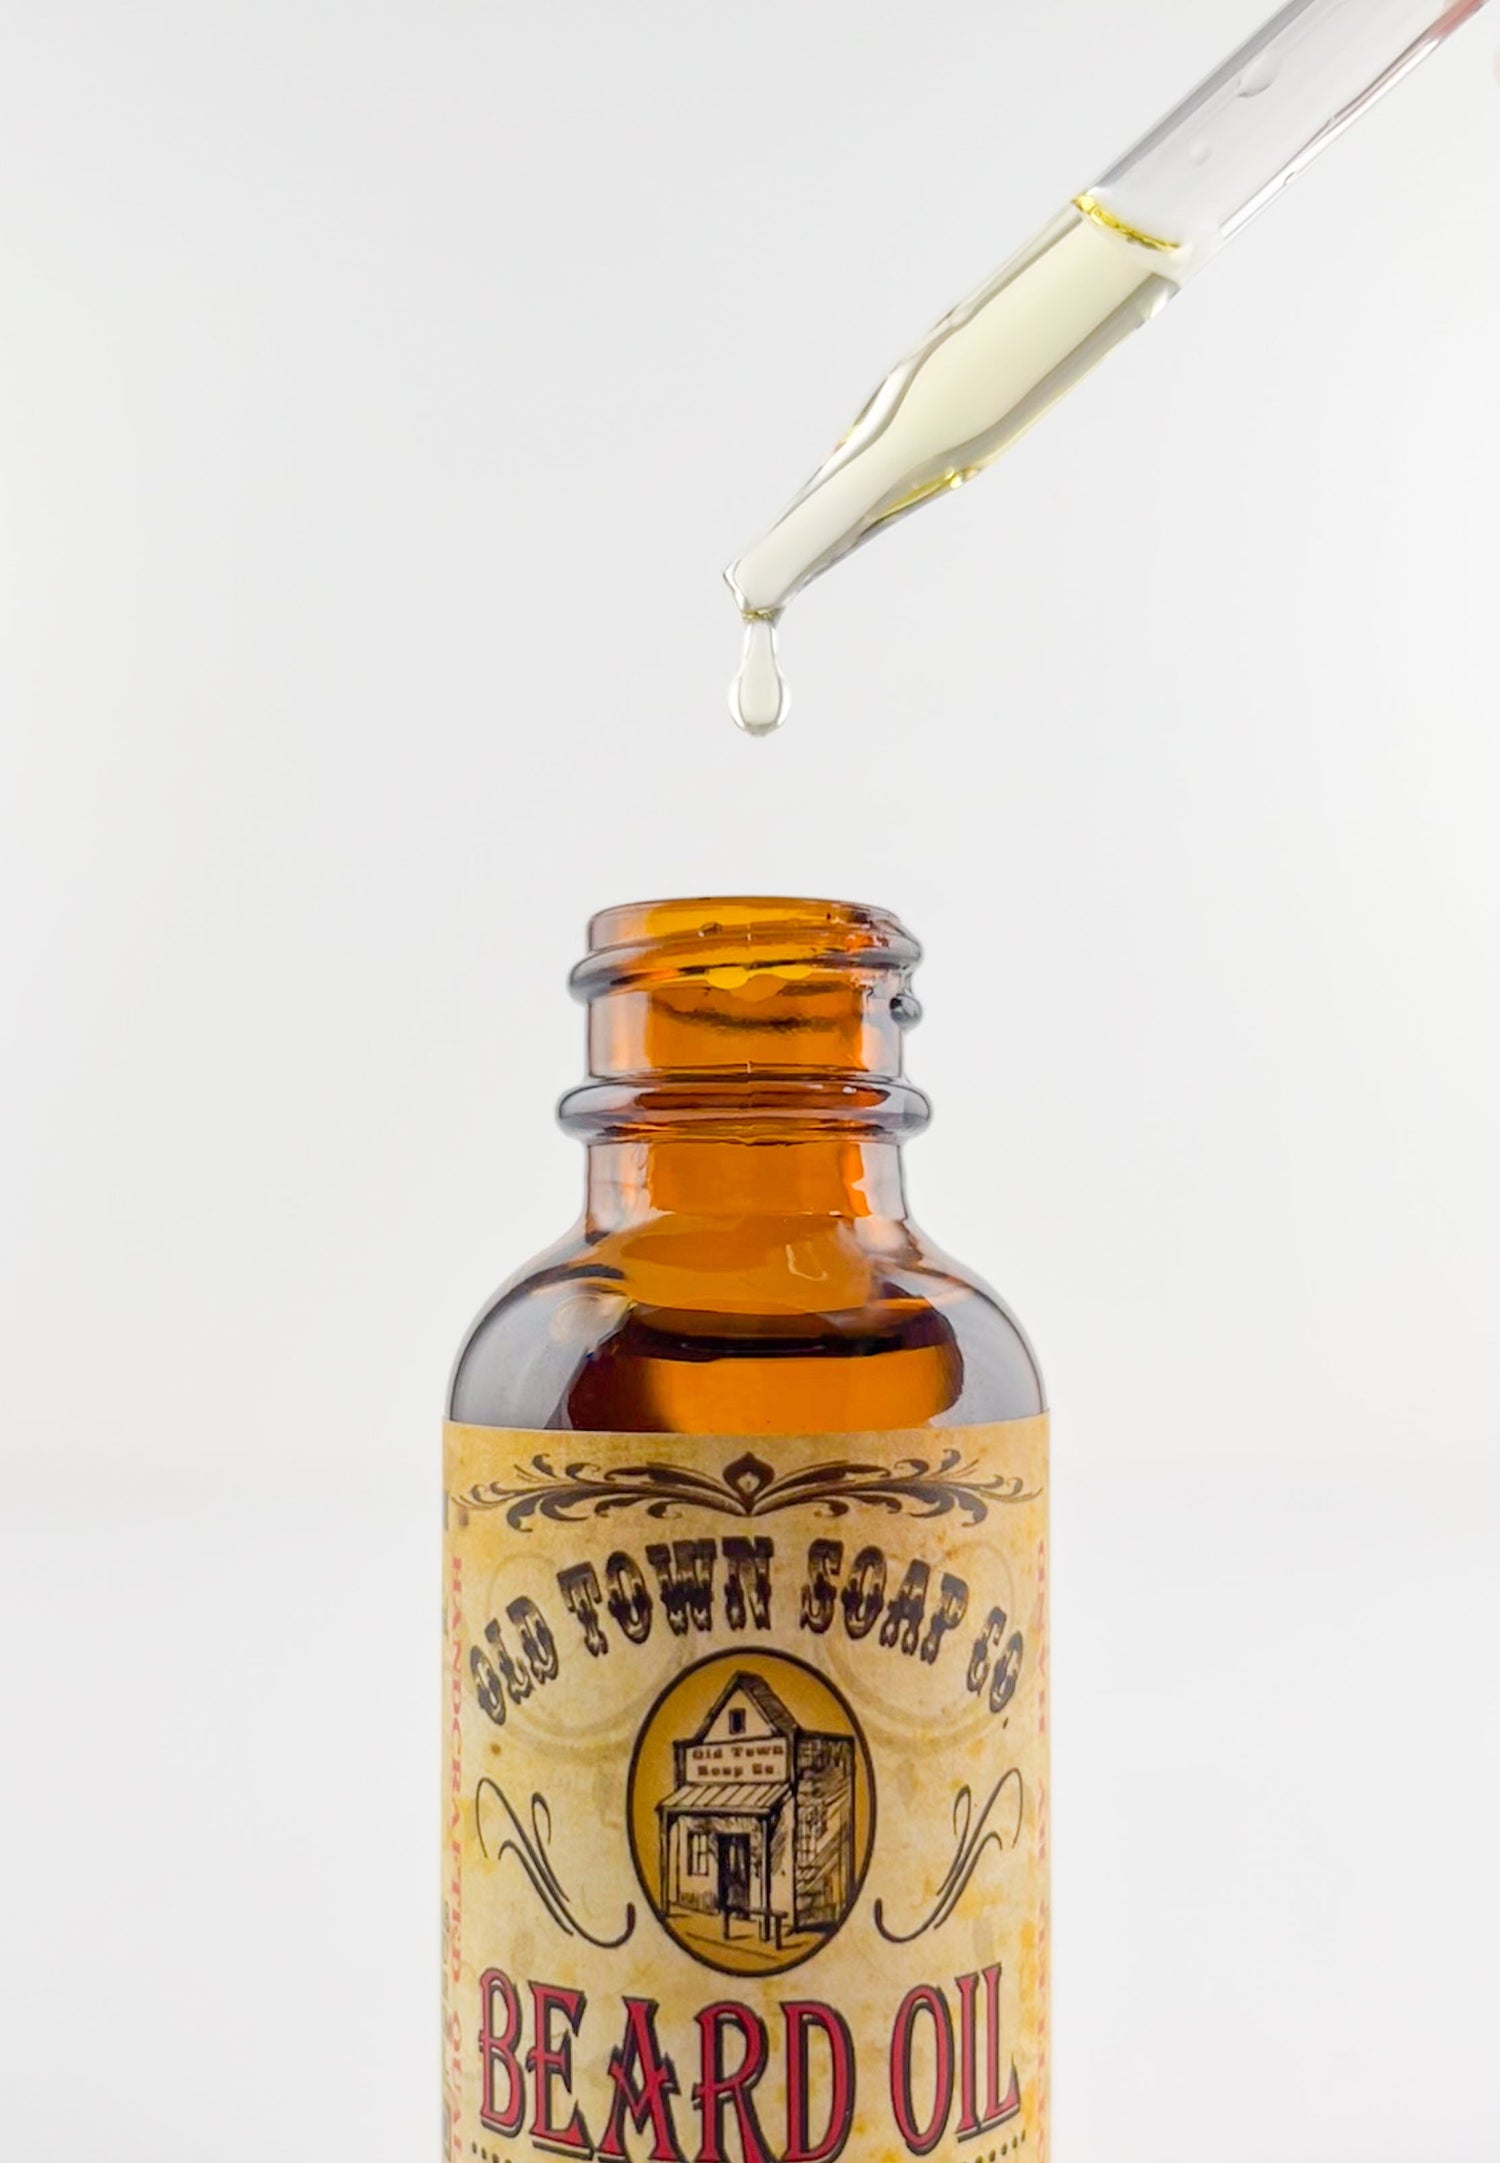 Dad Bod Beard Oil - Old Town Soap Co.